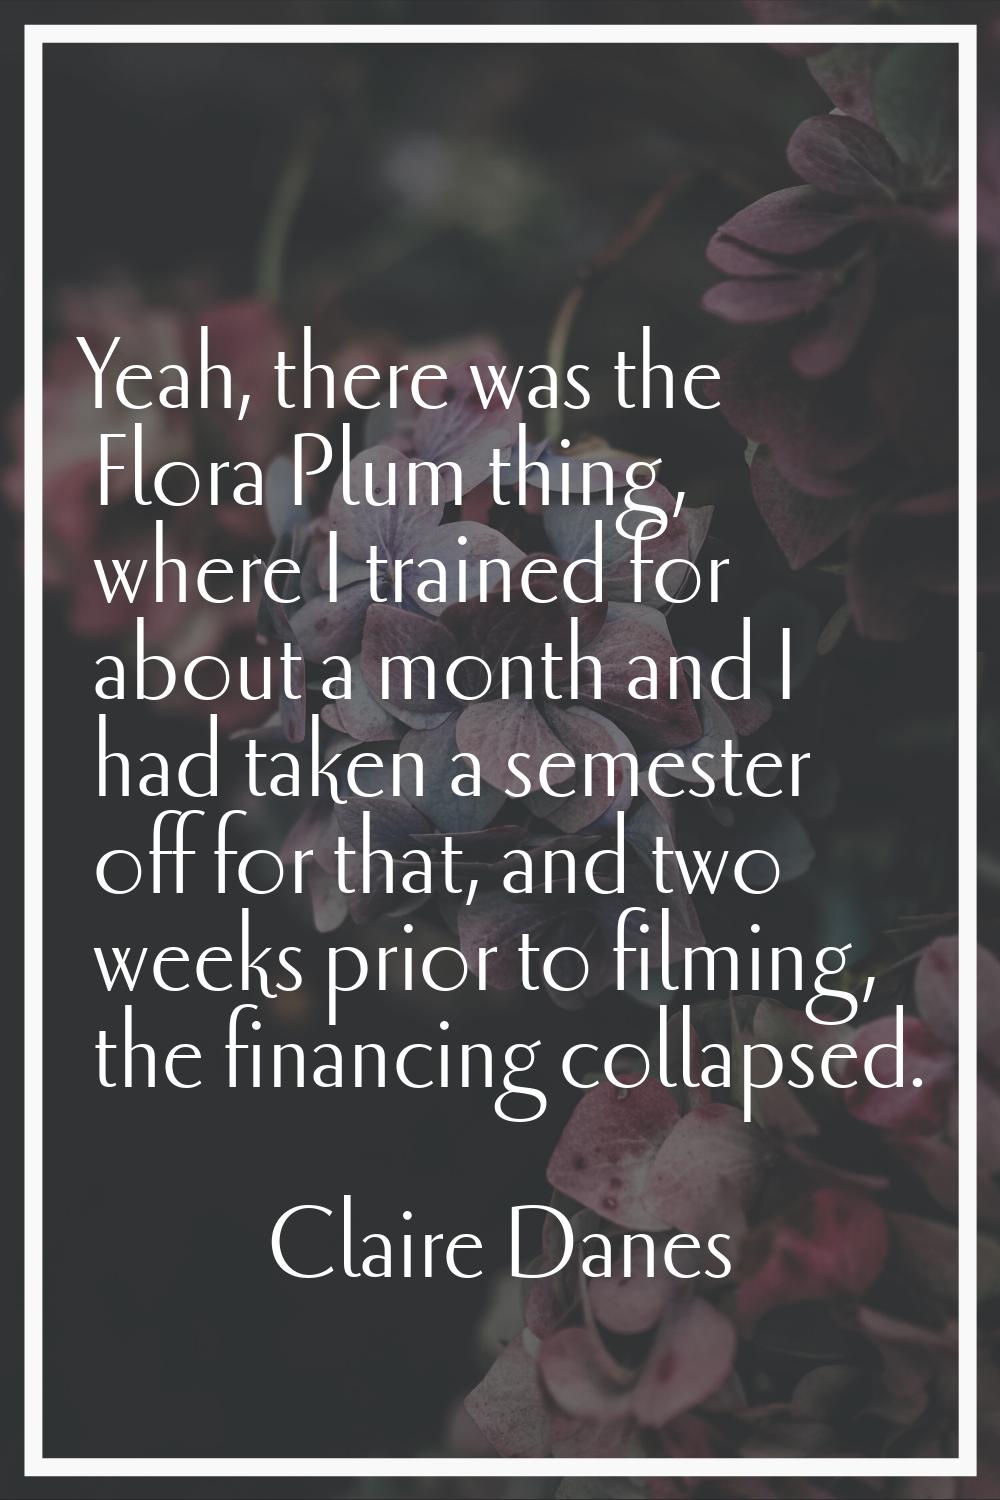 Yeah, there was the Flora Plum thing, where I trained for about a month and I had taken a semester 